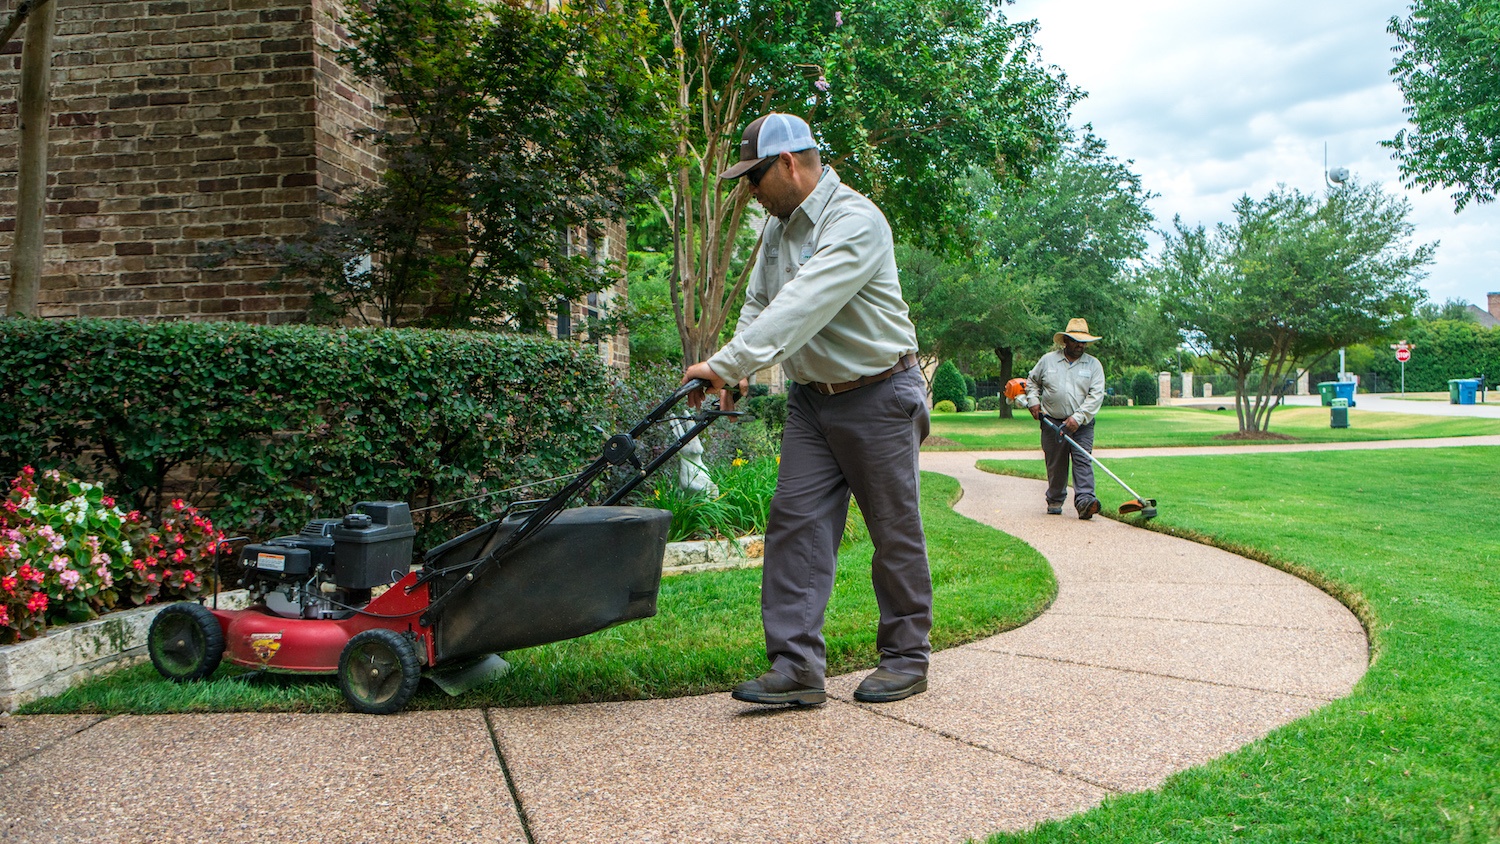 lawn mowing and edging in Texas lawn